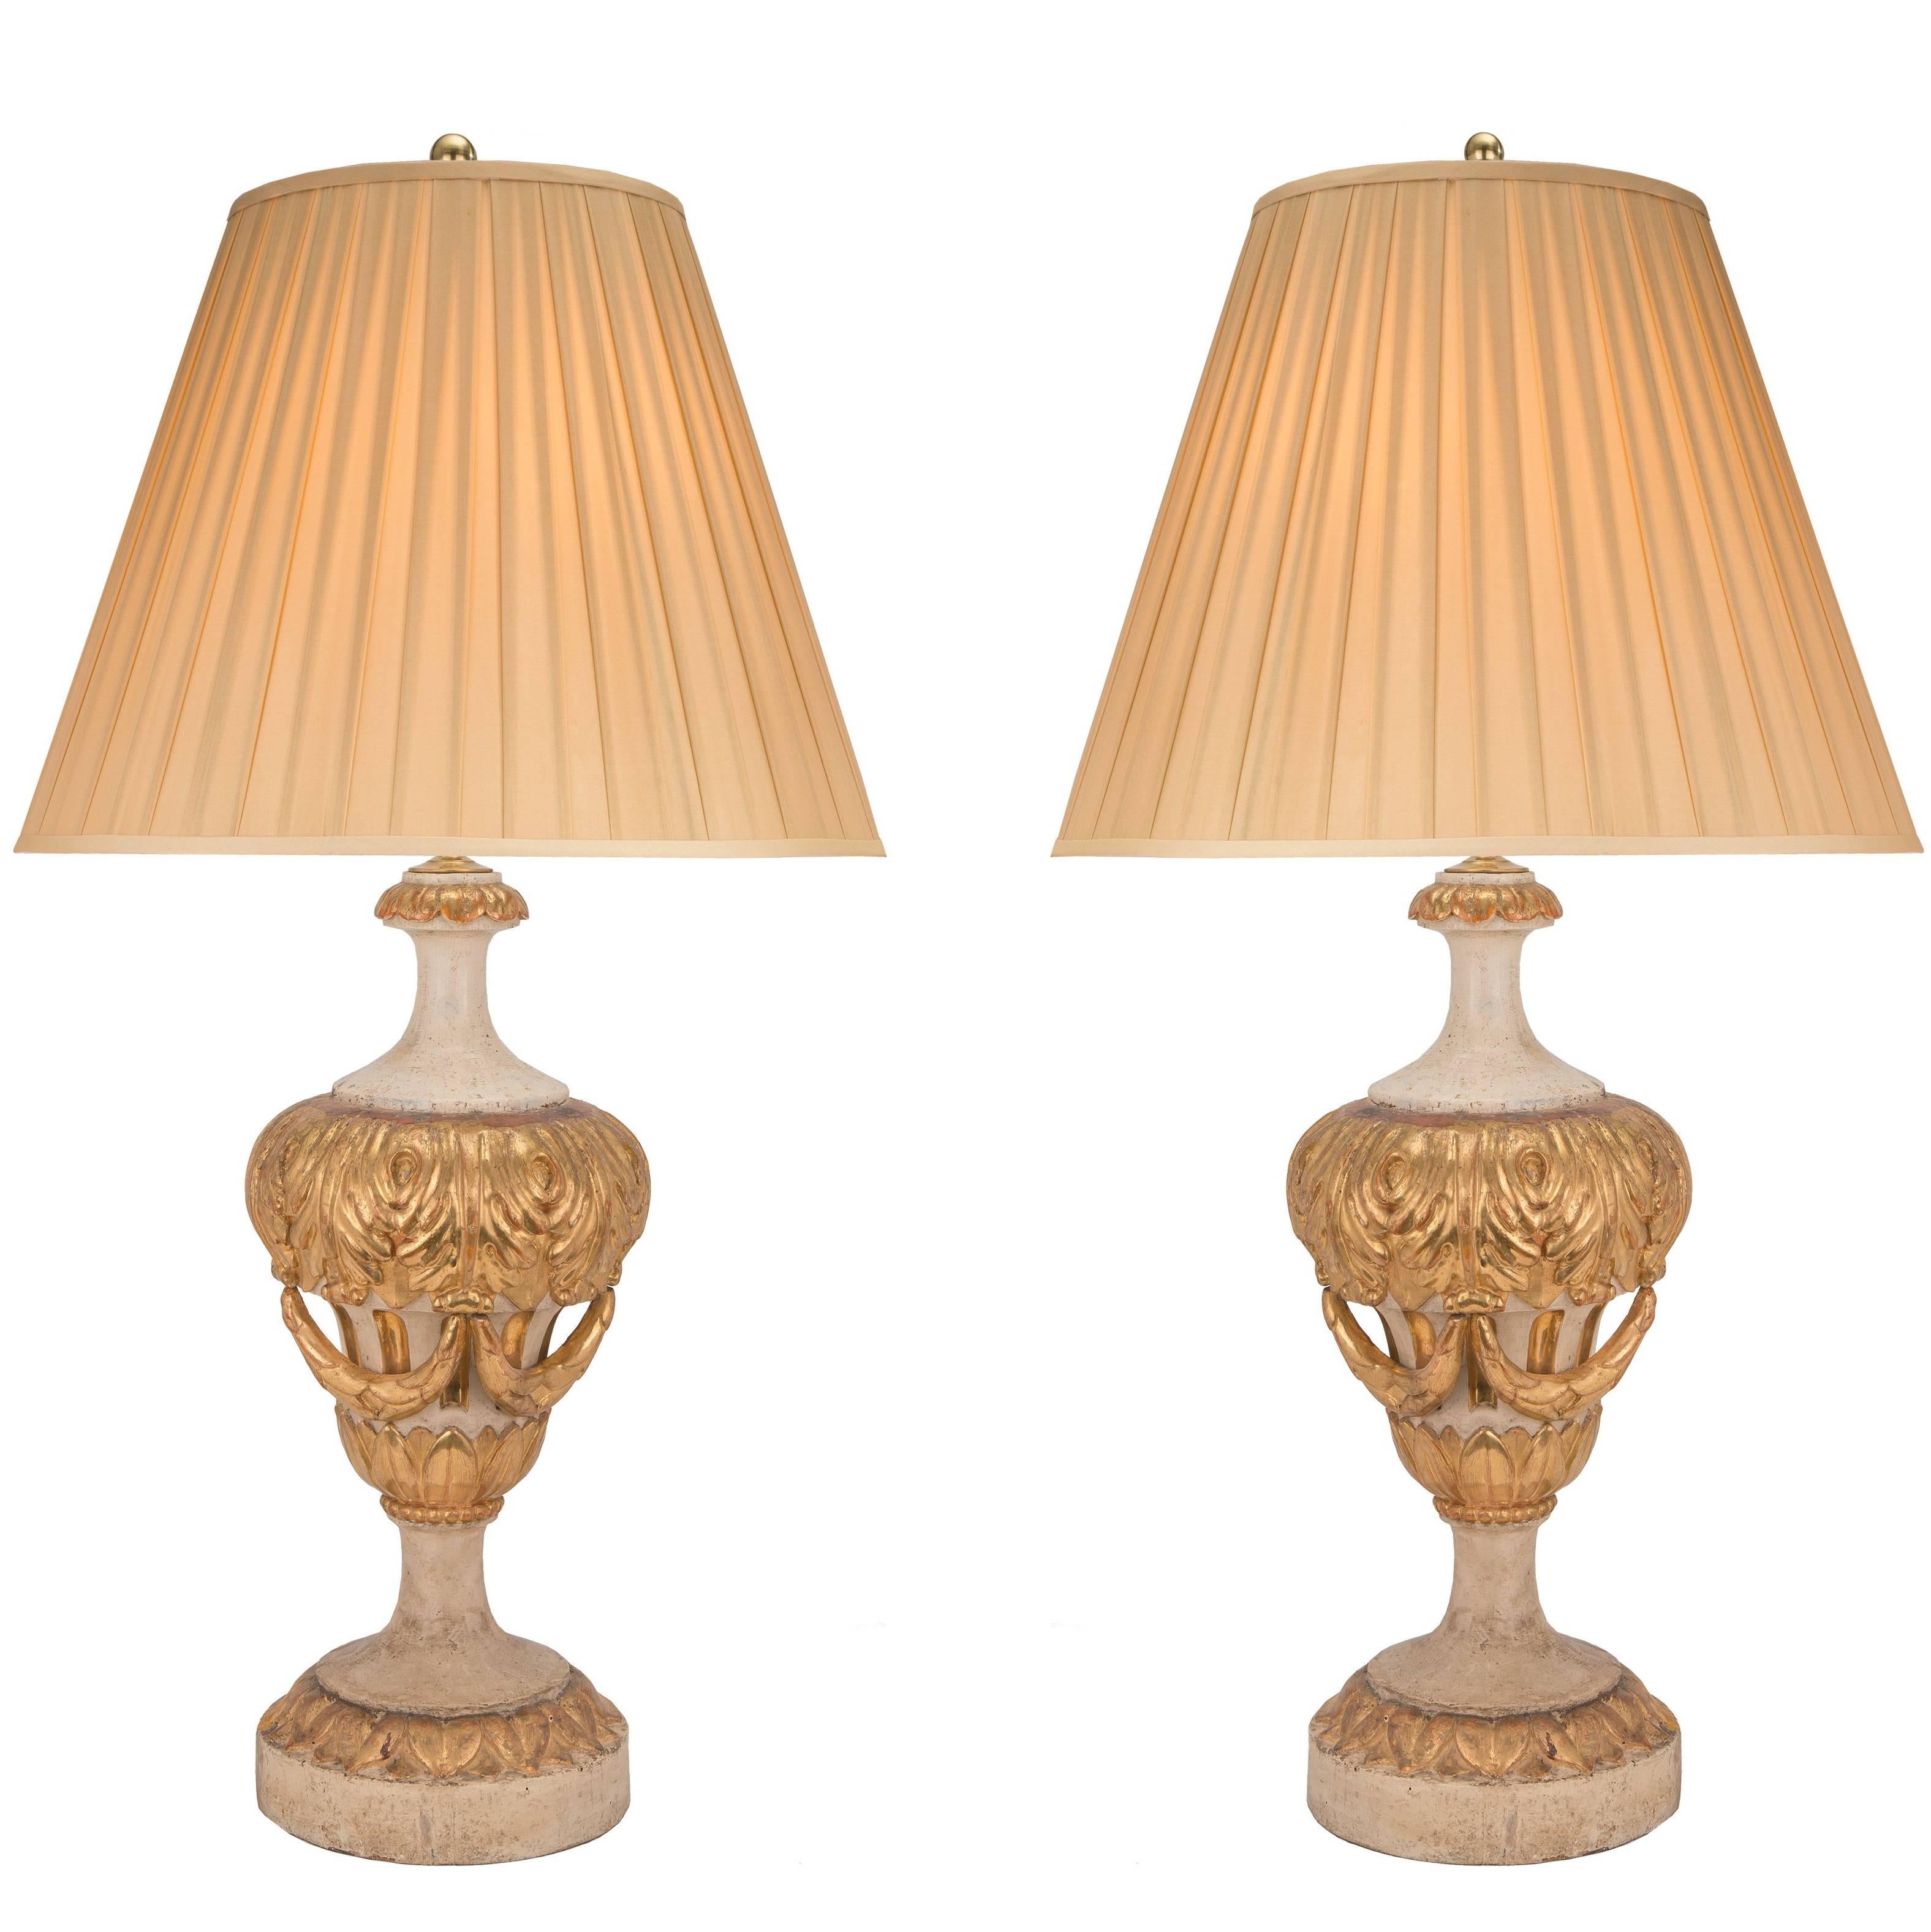 Pair of Italian 18th Century Louis XVI Period Patinated and Giltwood Lamps